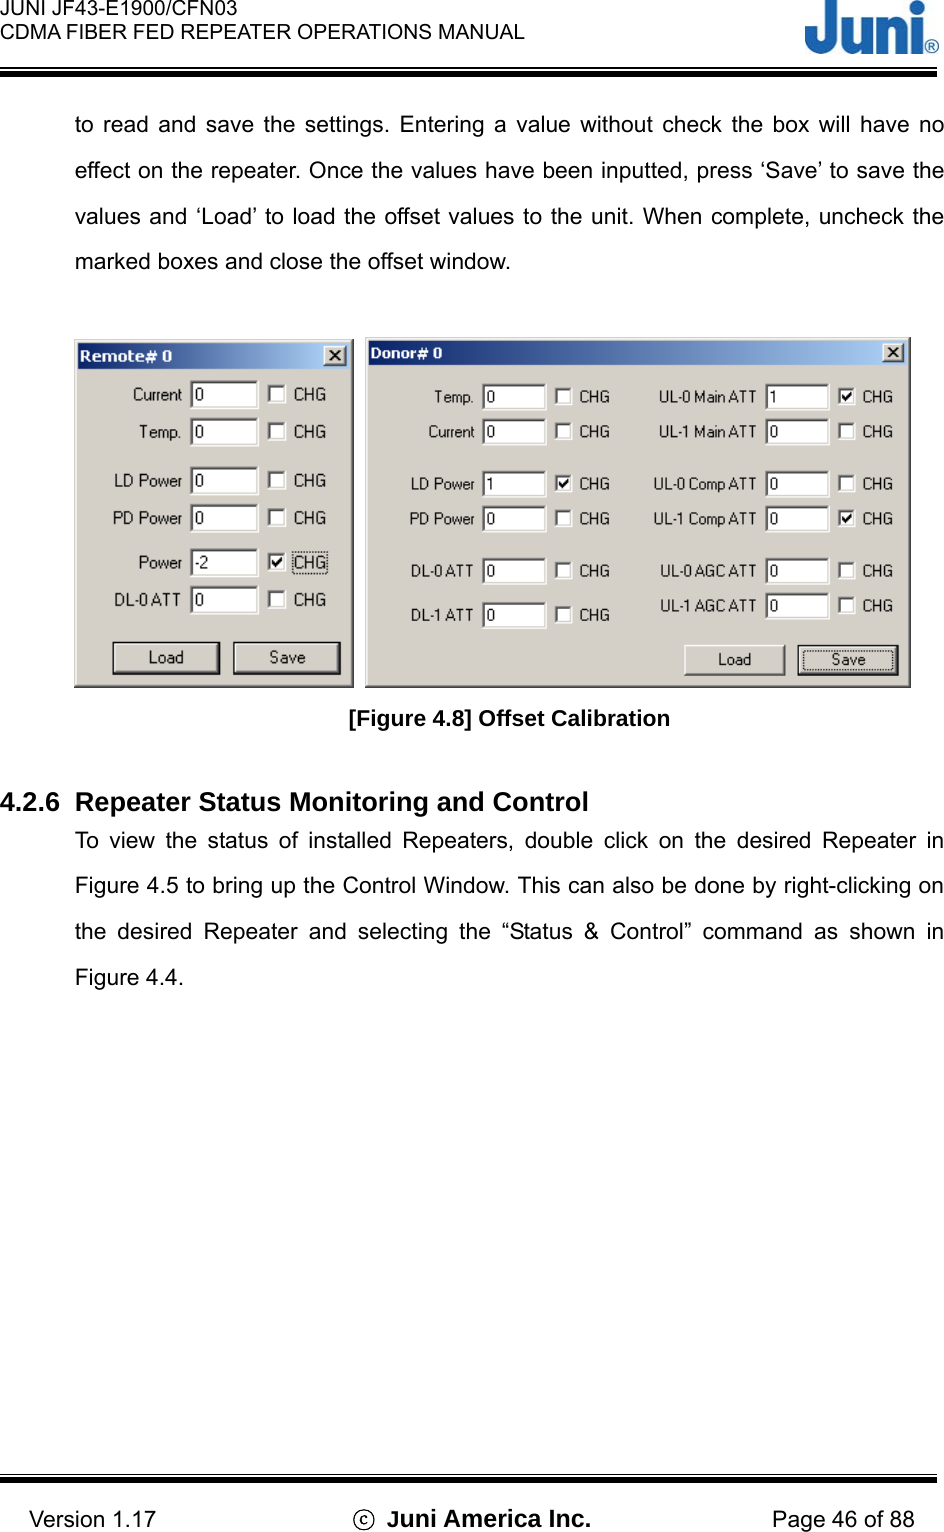  JUNI JF43-E1900/CFN03 CDMA FIBER FED REPEATER OPERATIONS MANUAL                                    Version 1.17  ⓒ Juni America Inc. Page 46 of 88 to read and save the settings. Entering a value without check the box will have no effect on the repeater. Once the values have been inputted, press ‘Save’ to save the values and ‘Load’ to load the offset values to the unit. When complete, uncheck the marked boxes and close the offset window.     [Figure 4.8] Offset Calibration  4.2.6  Repeater Status Monitoring and Control To view the status of installed Repeaters, double click on the desired Repeater in Figure 4.5 to bring up the Control Window. This can also be done by right-clicking on the desired Repeater and selecting the “Status &amp; Control” command as shown in Figure 4.4. 